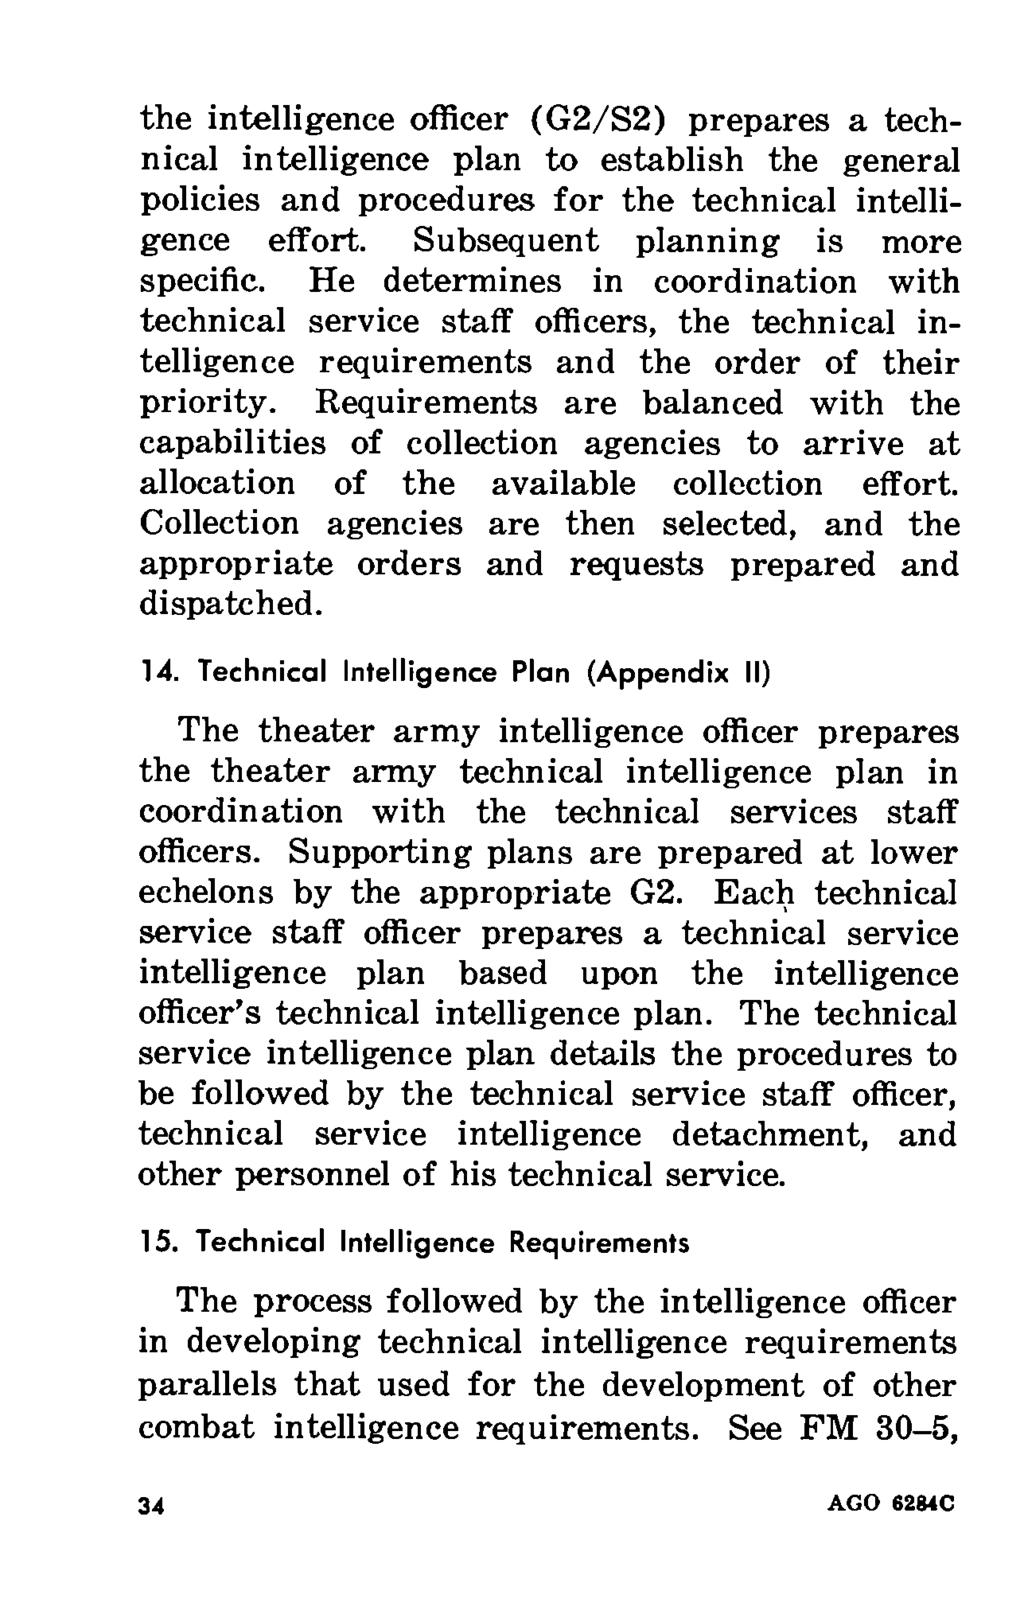 the intelligence officer (G2/S2) prepares a technical intelligence plan to establish the general policies and procedures for the technical intelligence effort. Subsequent planning is more specific.